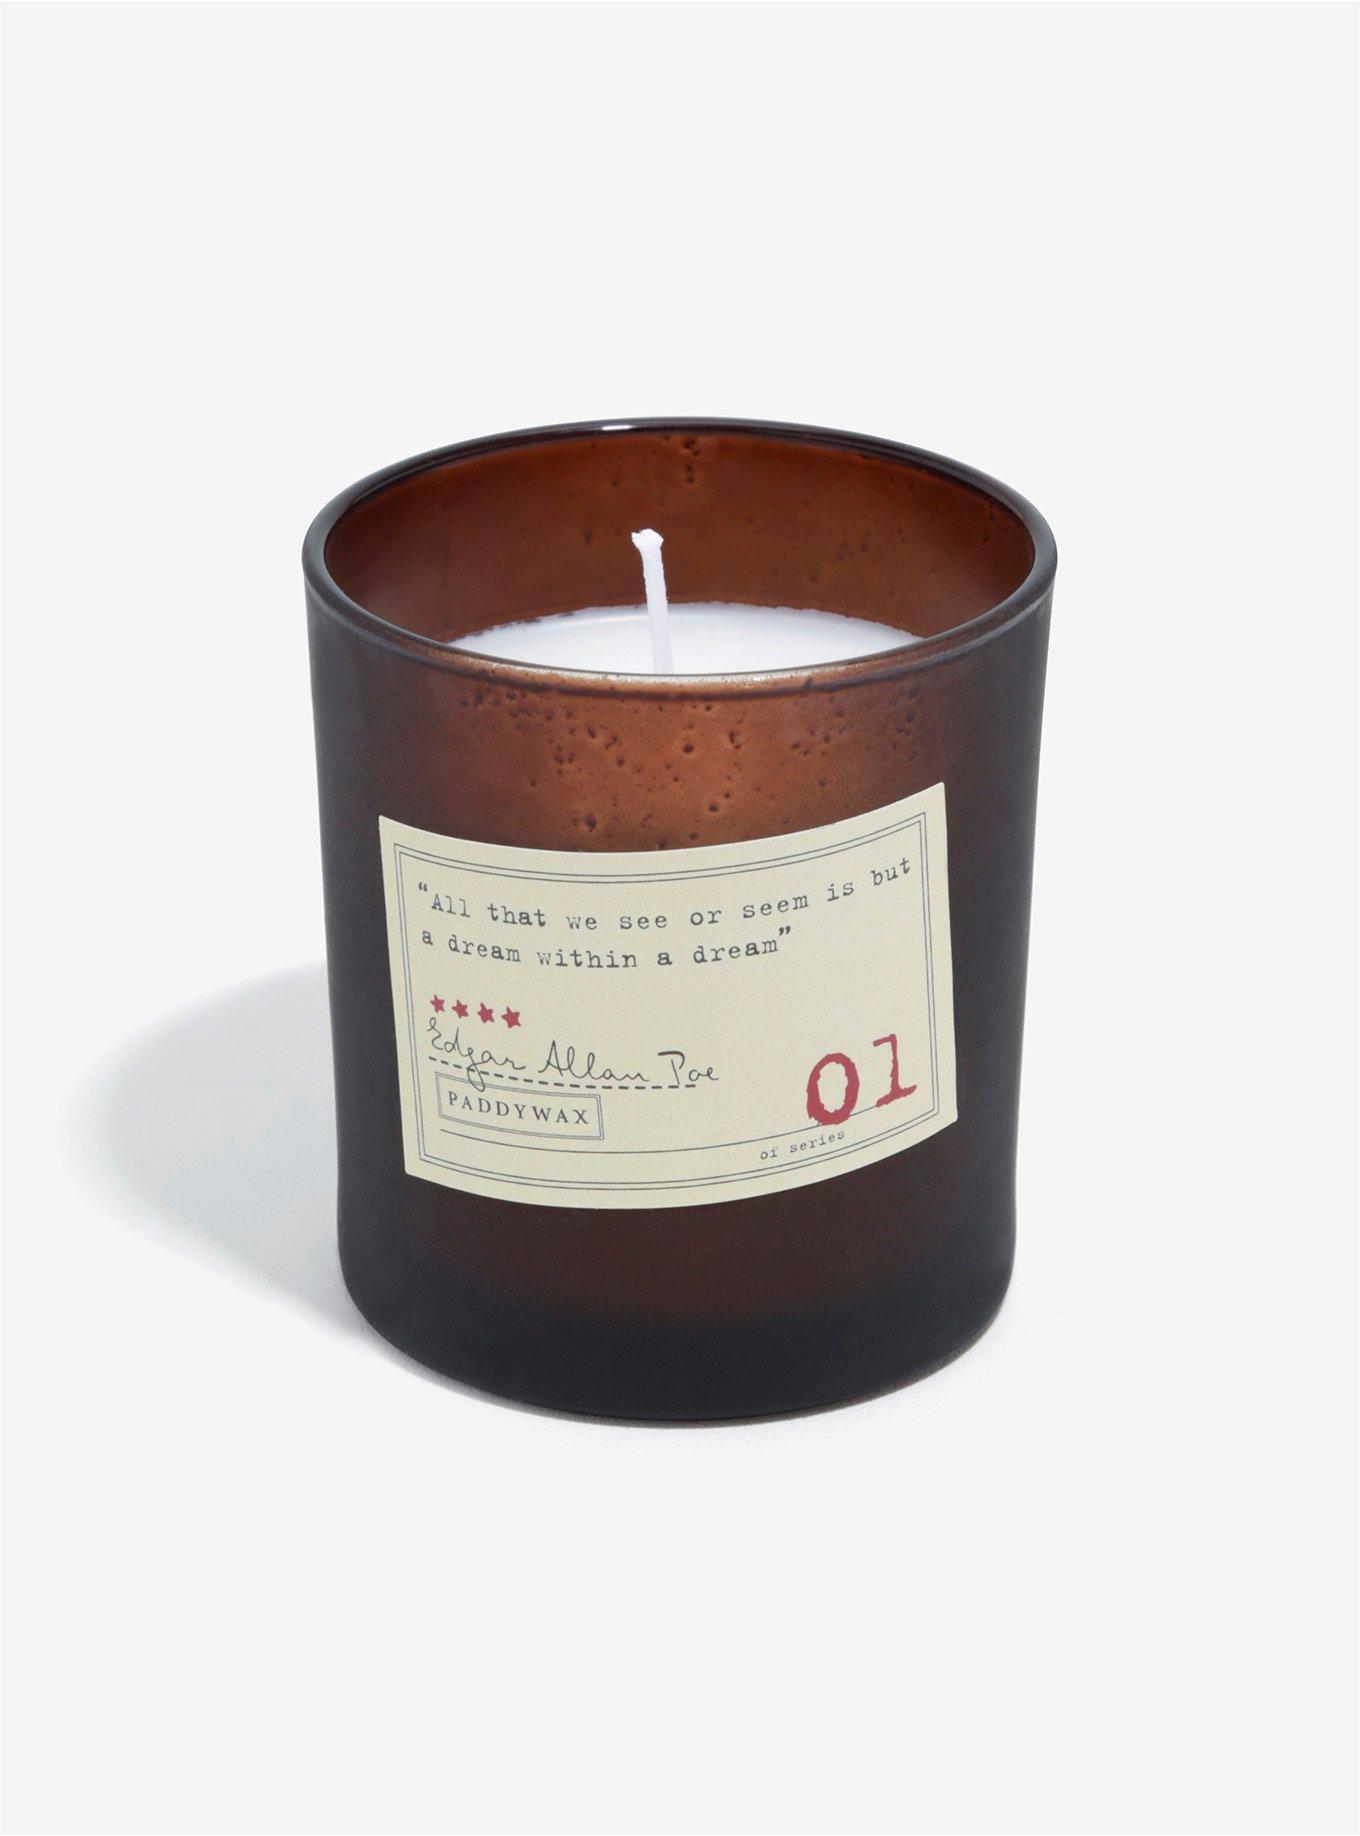 Paddywax Edgar Allen Poe Library Candle | BoxLunch